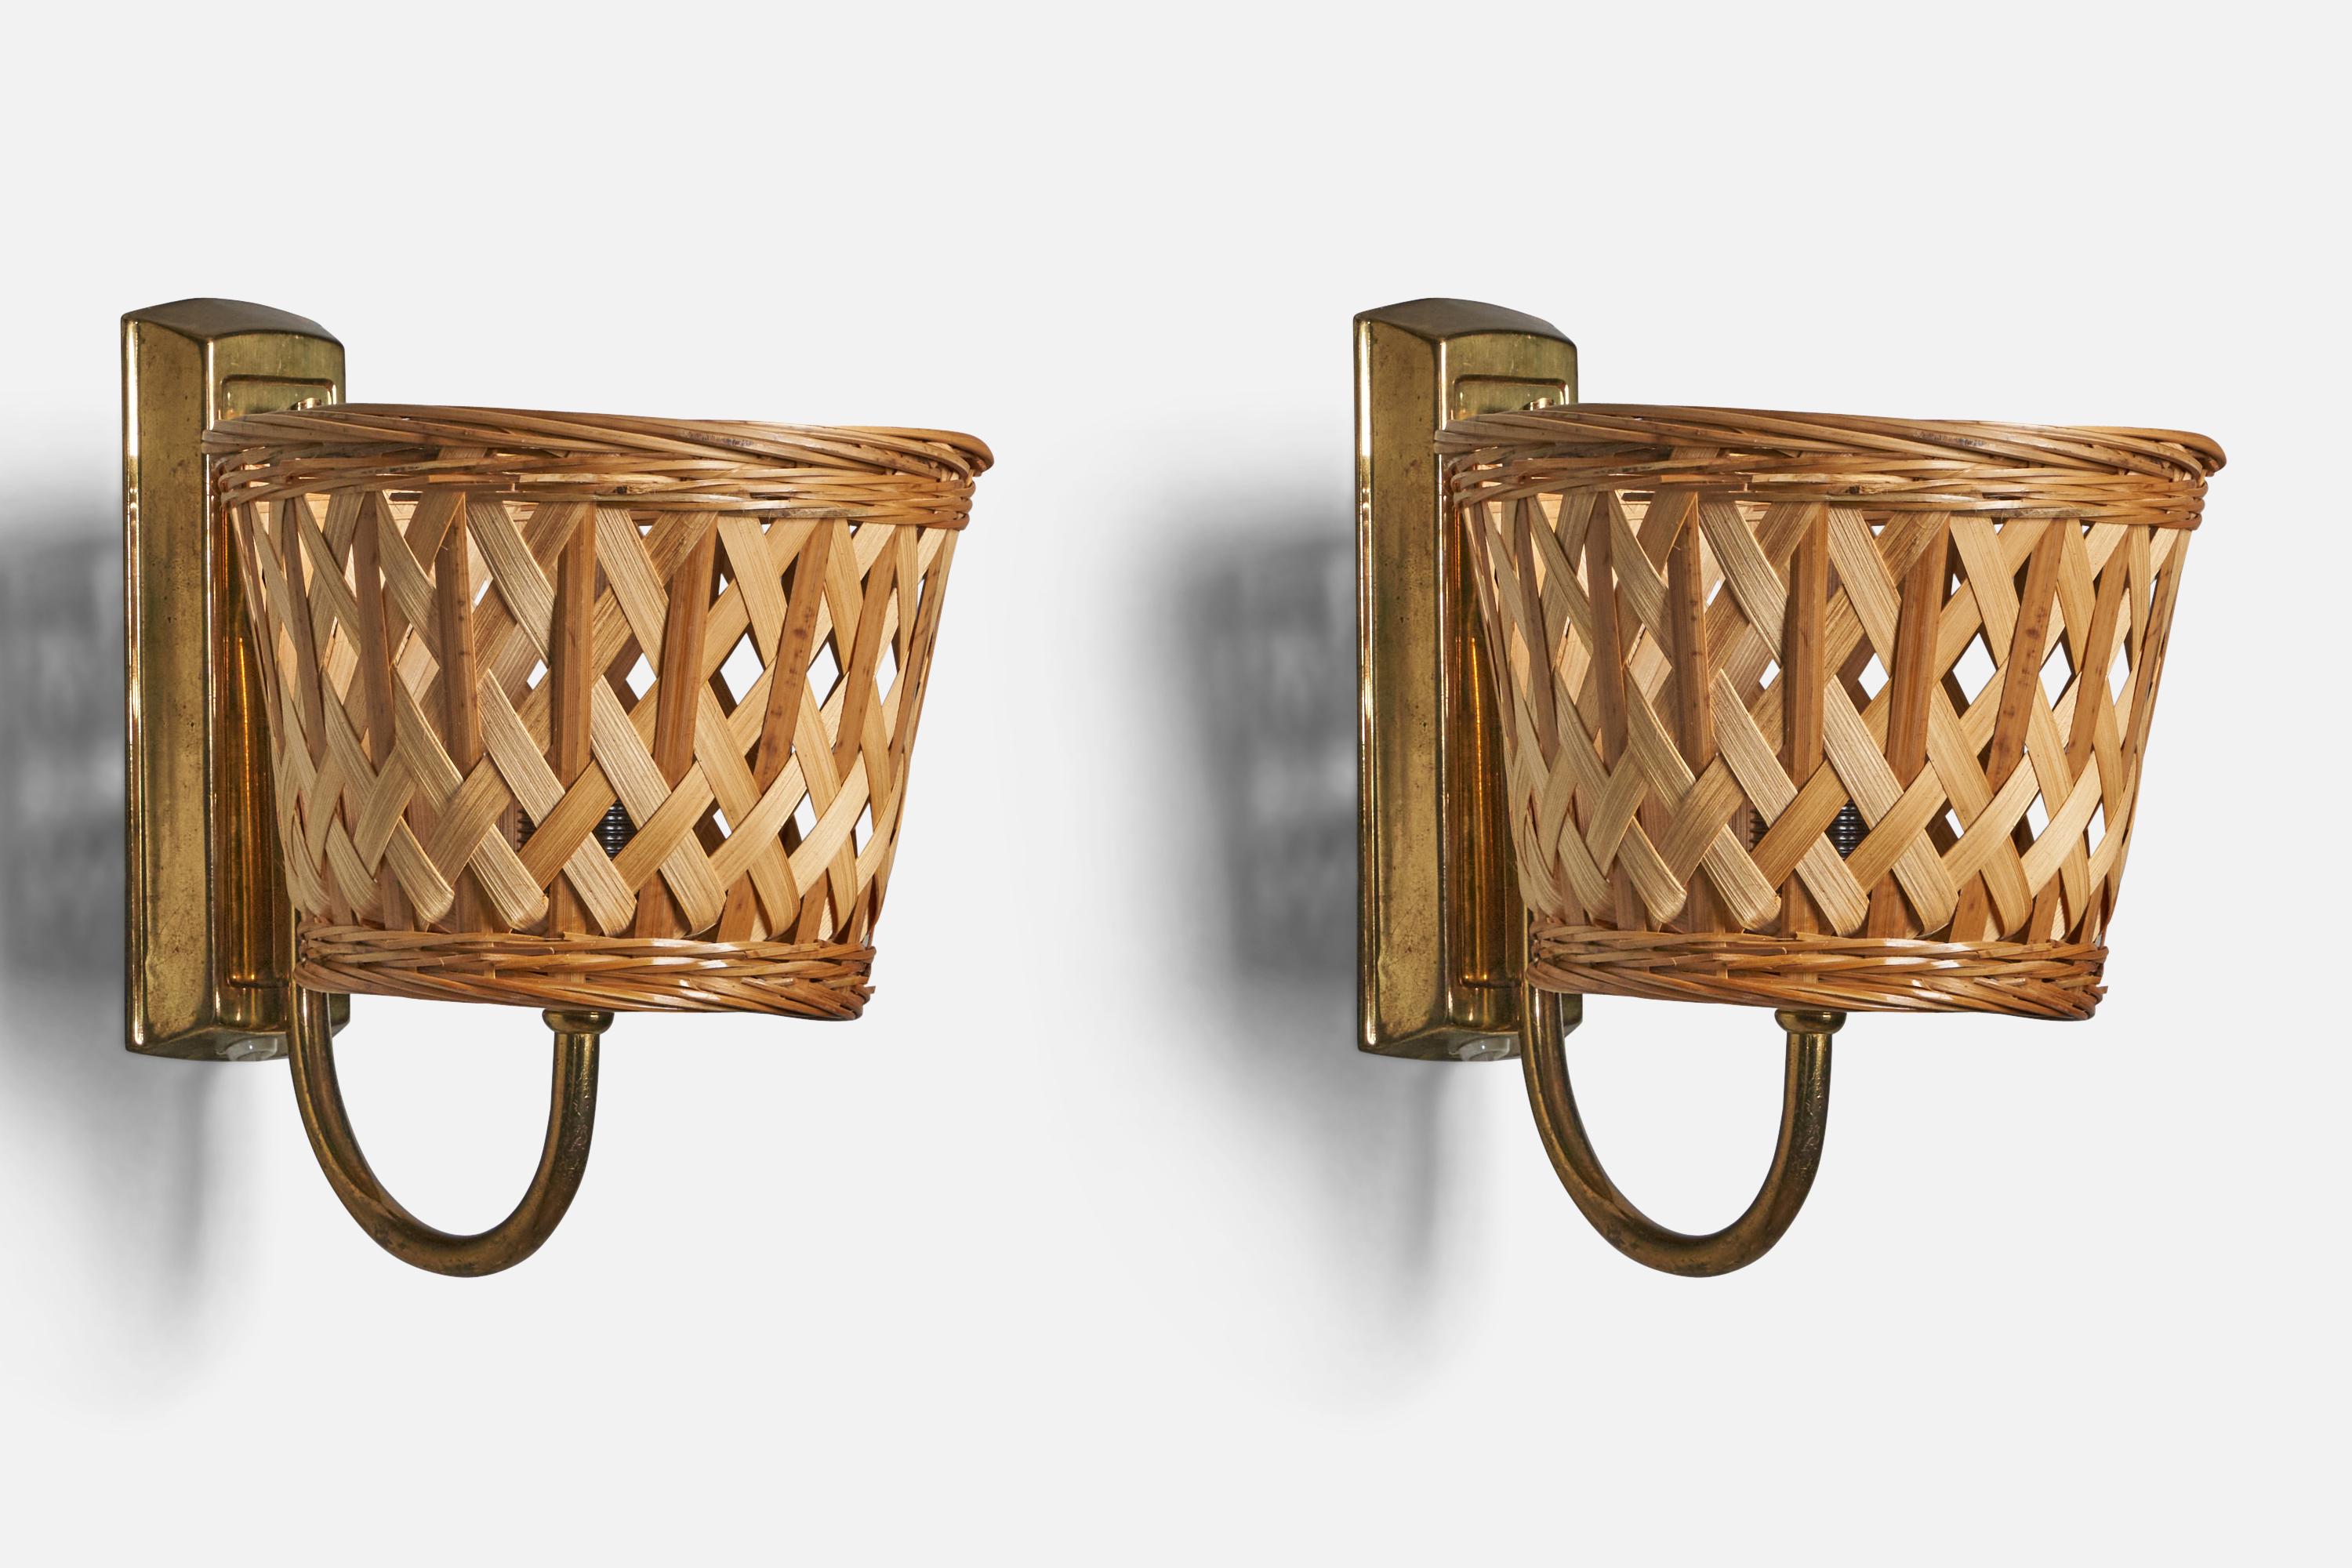 A pair of brass and rattan wall lights, designed and produced in Sweden, c. 1970s.

Overall Dimensions (inches):7.8